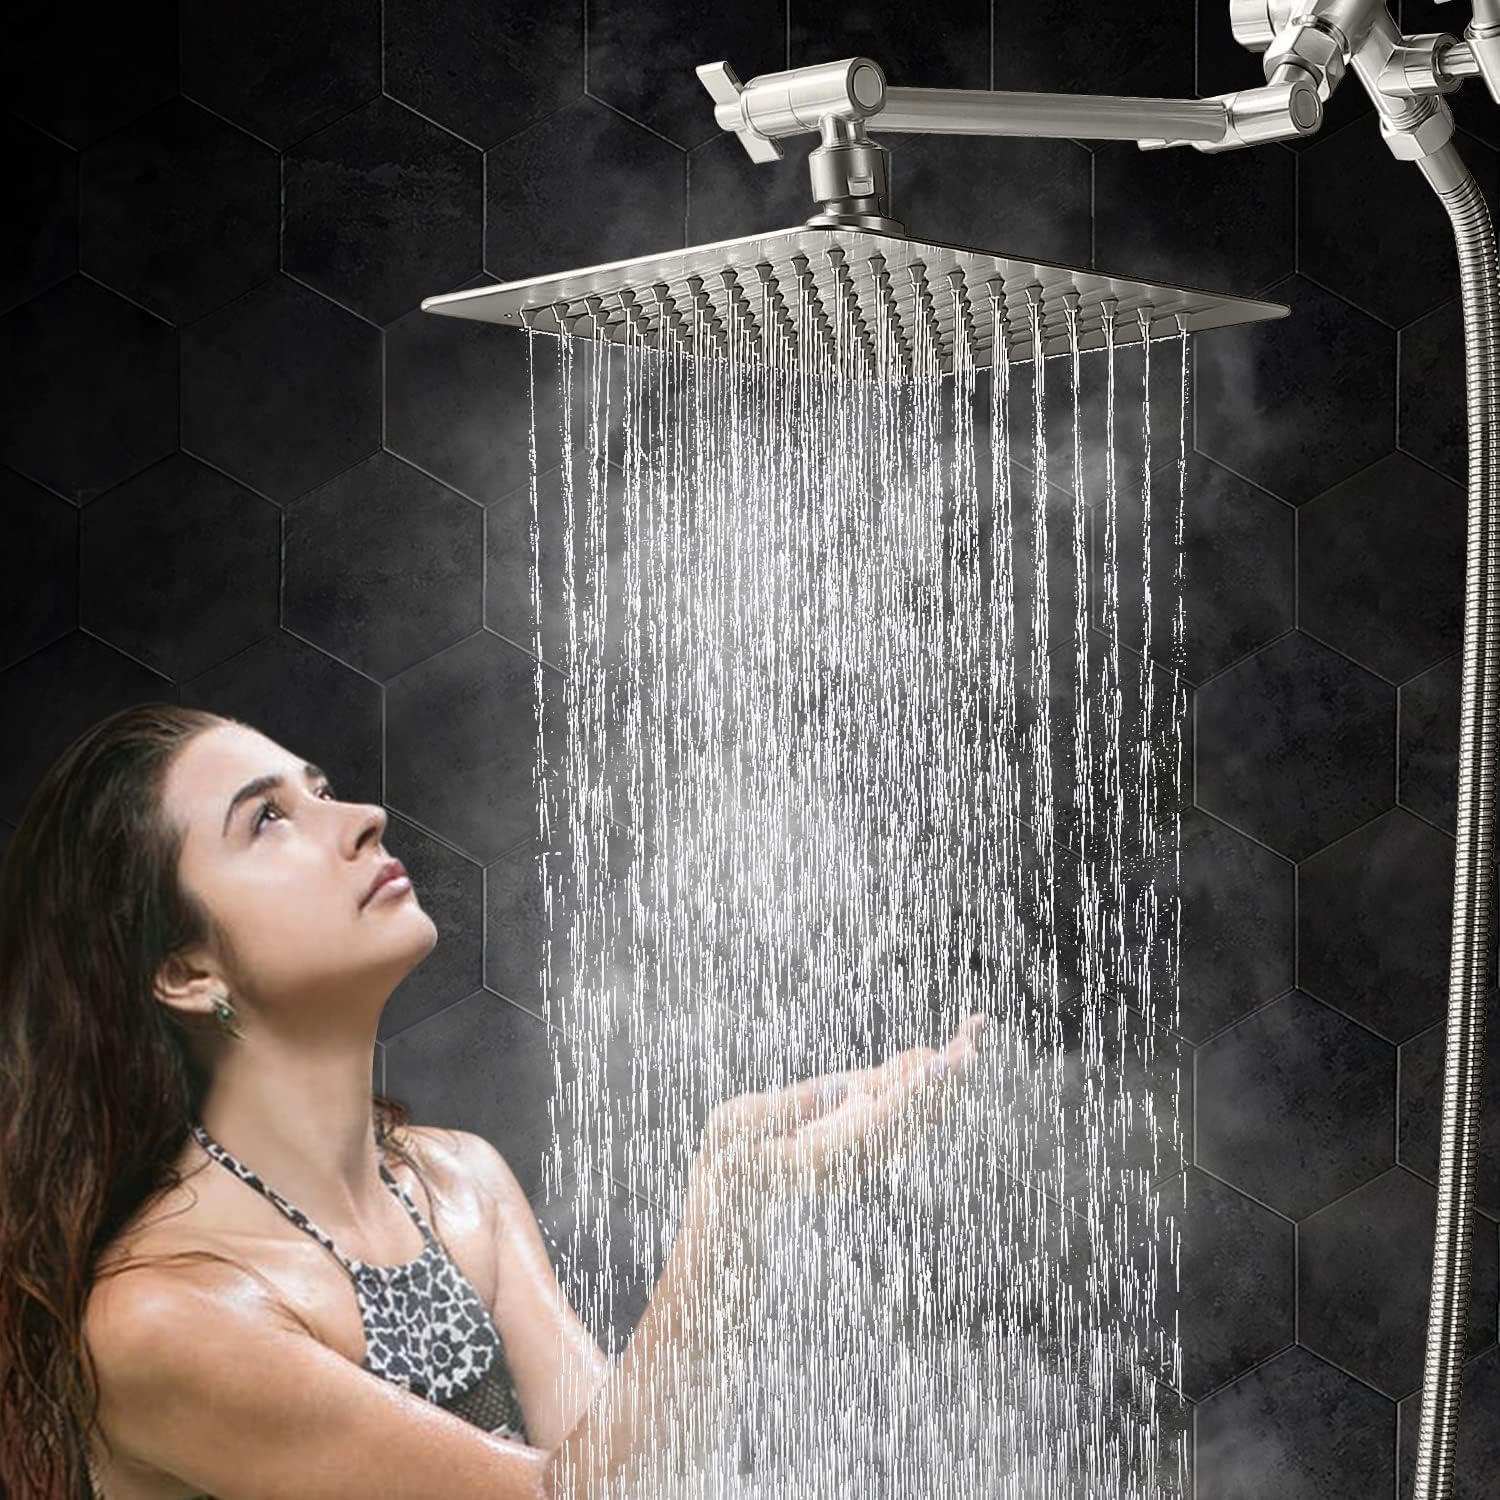 G-Promise All Metal Dual Square Rain Shower Head Combo - 8 | Handheld Shower Wand with 71 Extra Long Flexible Hose | Smooth 3-Way Diverter | Adjustable Extension Arm - A Bathroom Upgrade